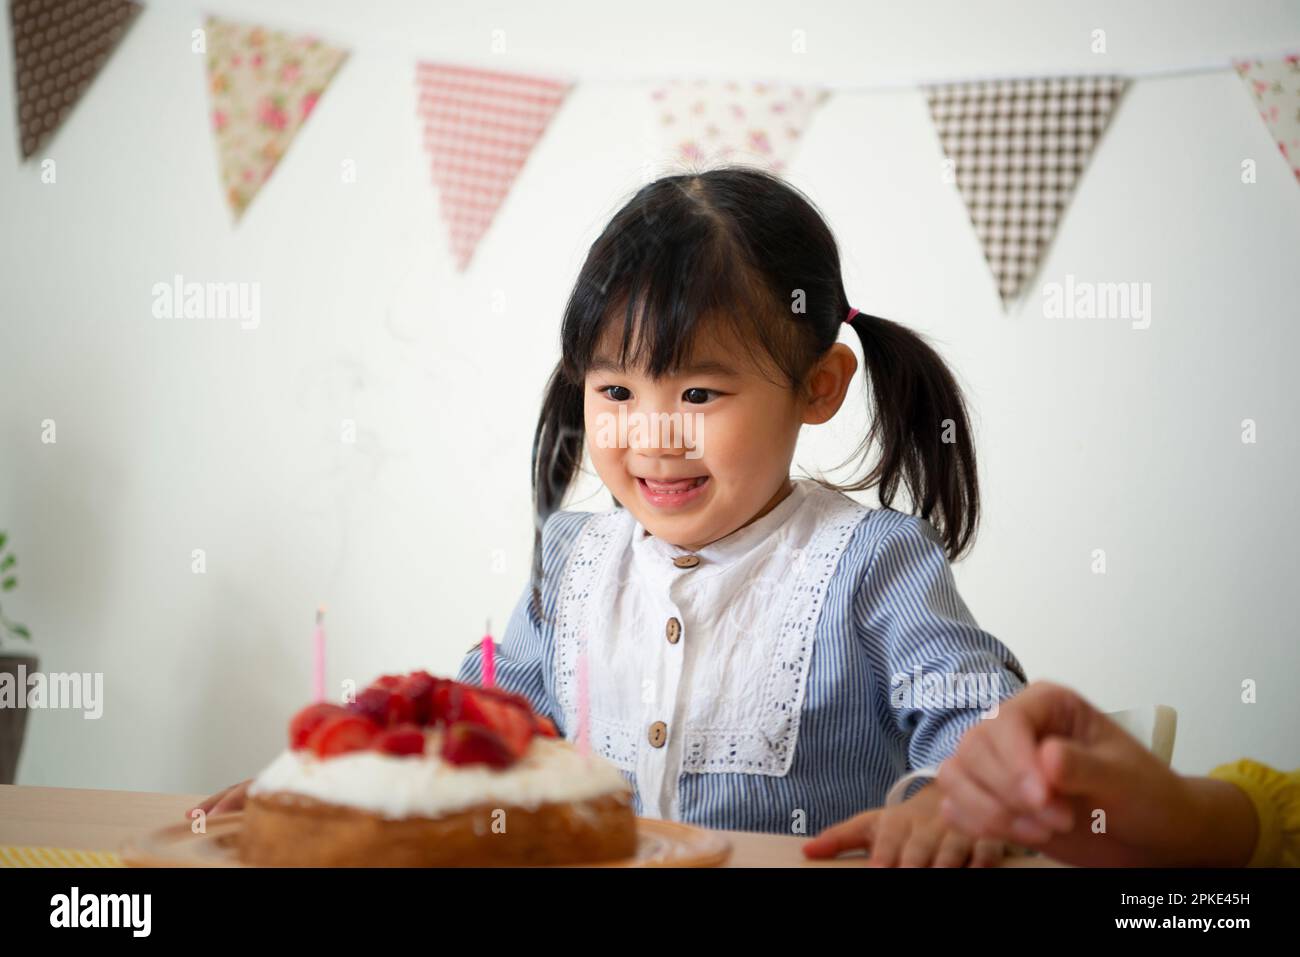 Girl looking at cake Stock Photo